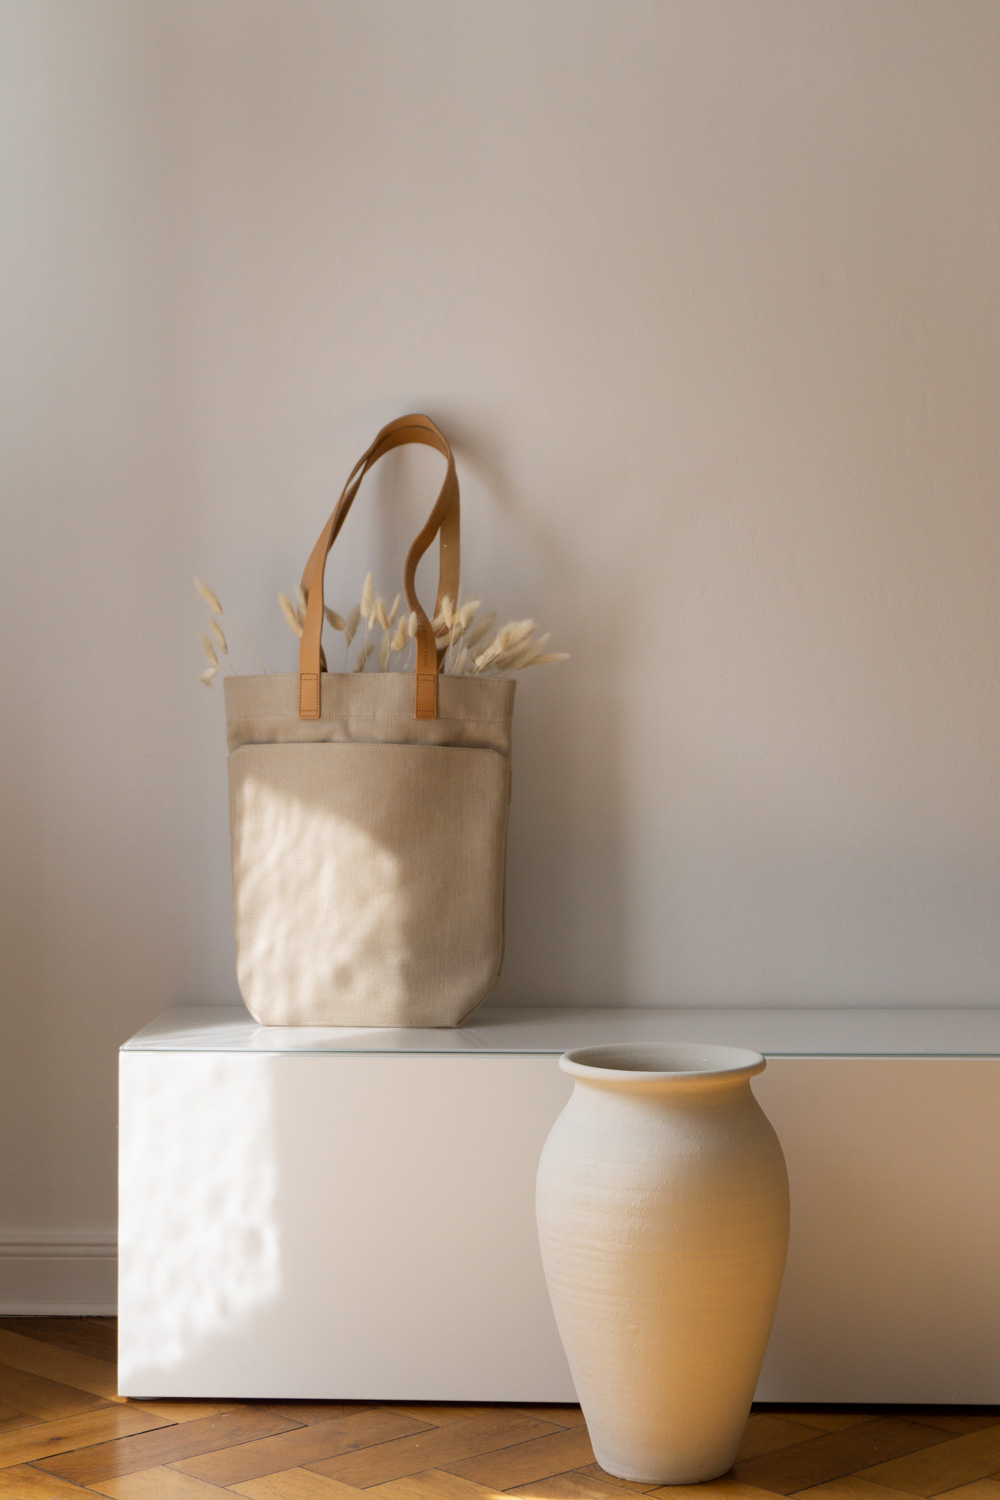 PROJECTKIN Travel Canvas Bag - Sustainable Luggage and travel accessories from eco friendly materials | Danish design, Scandinavian products, mindful accessories, luggage | product photography, shadows, light, minimalist aesthetic | RG Daily Blog